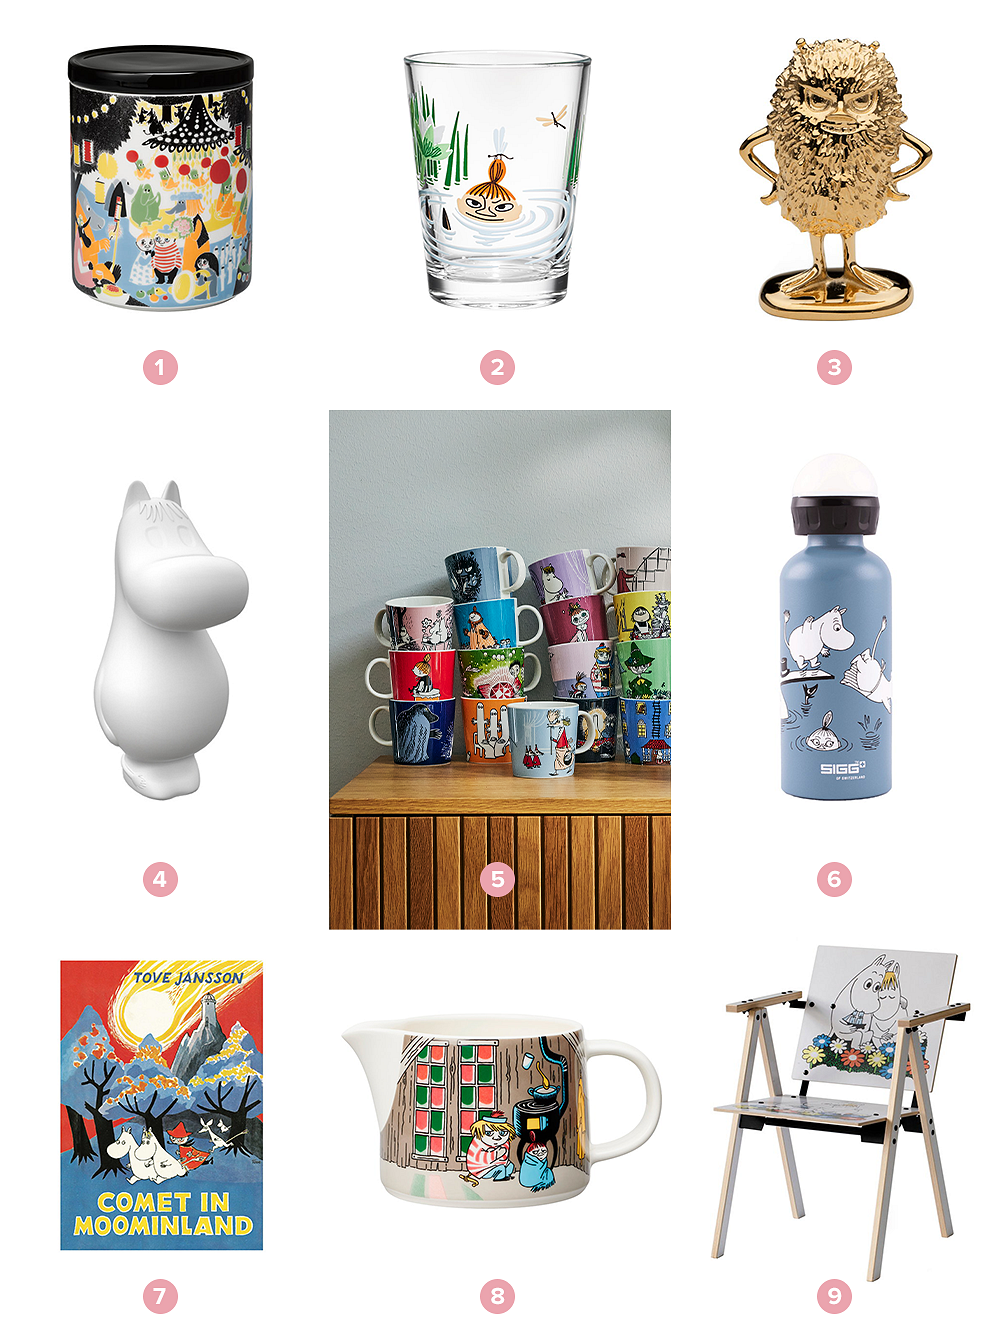 Moomin products at Finnish Design Shop